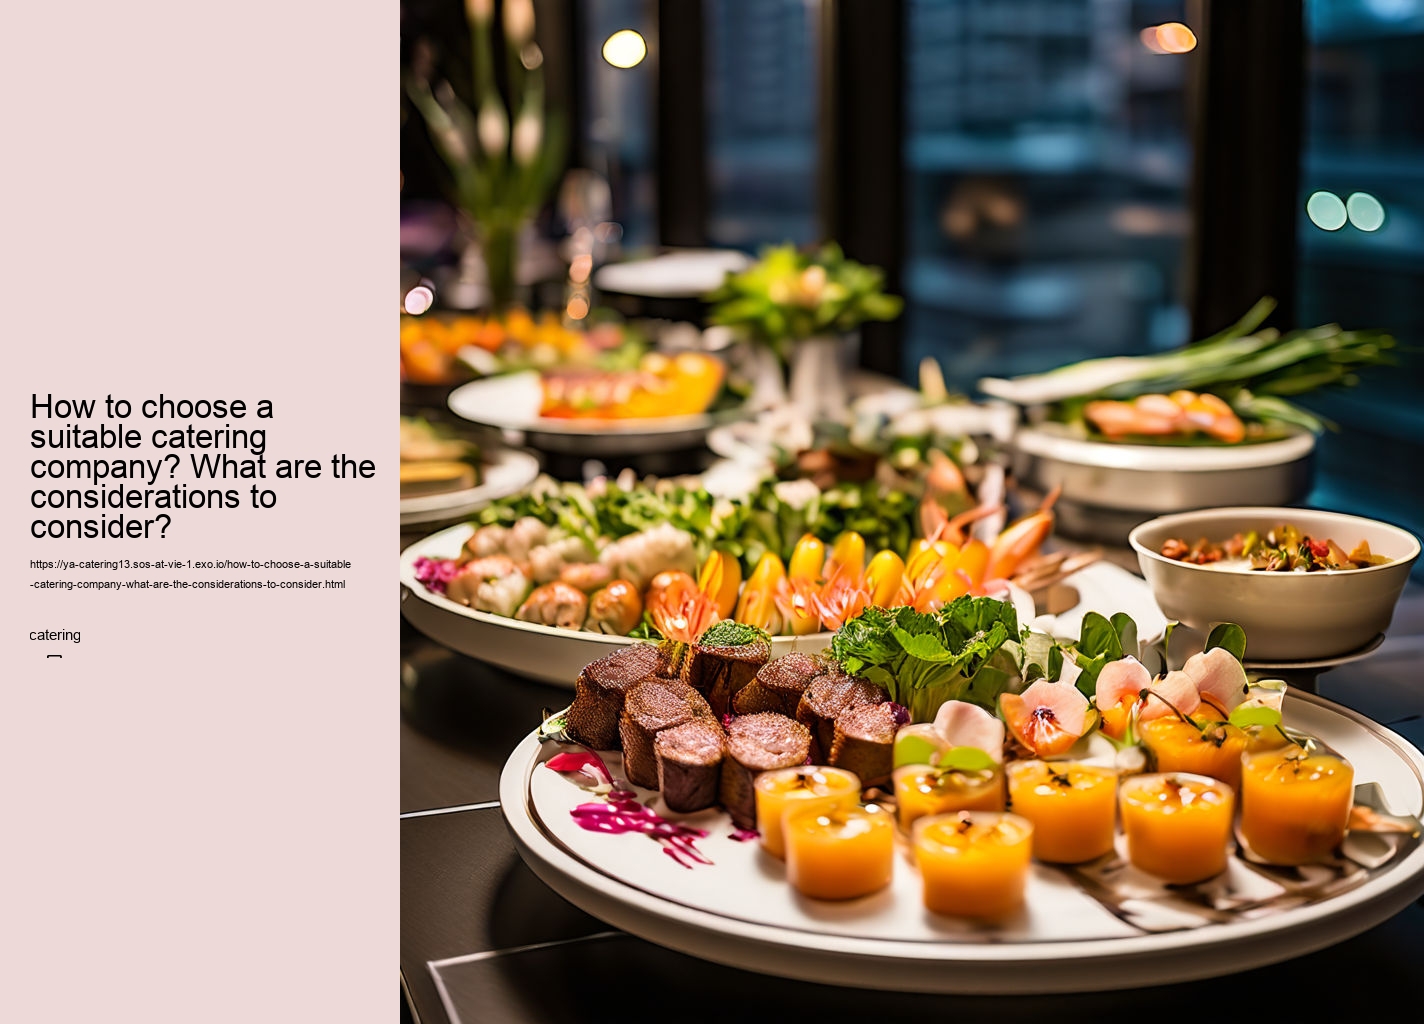 How to choose a suitable catering company? What are the considerations to consider?